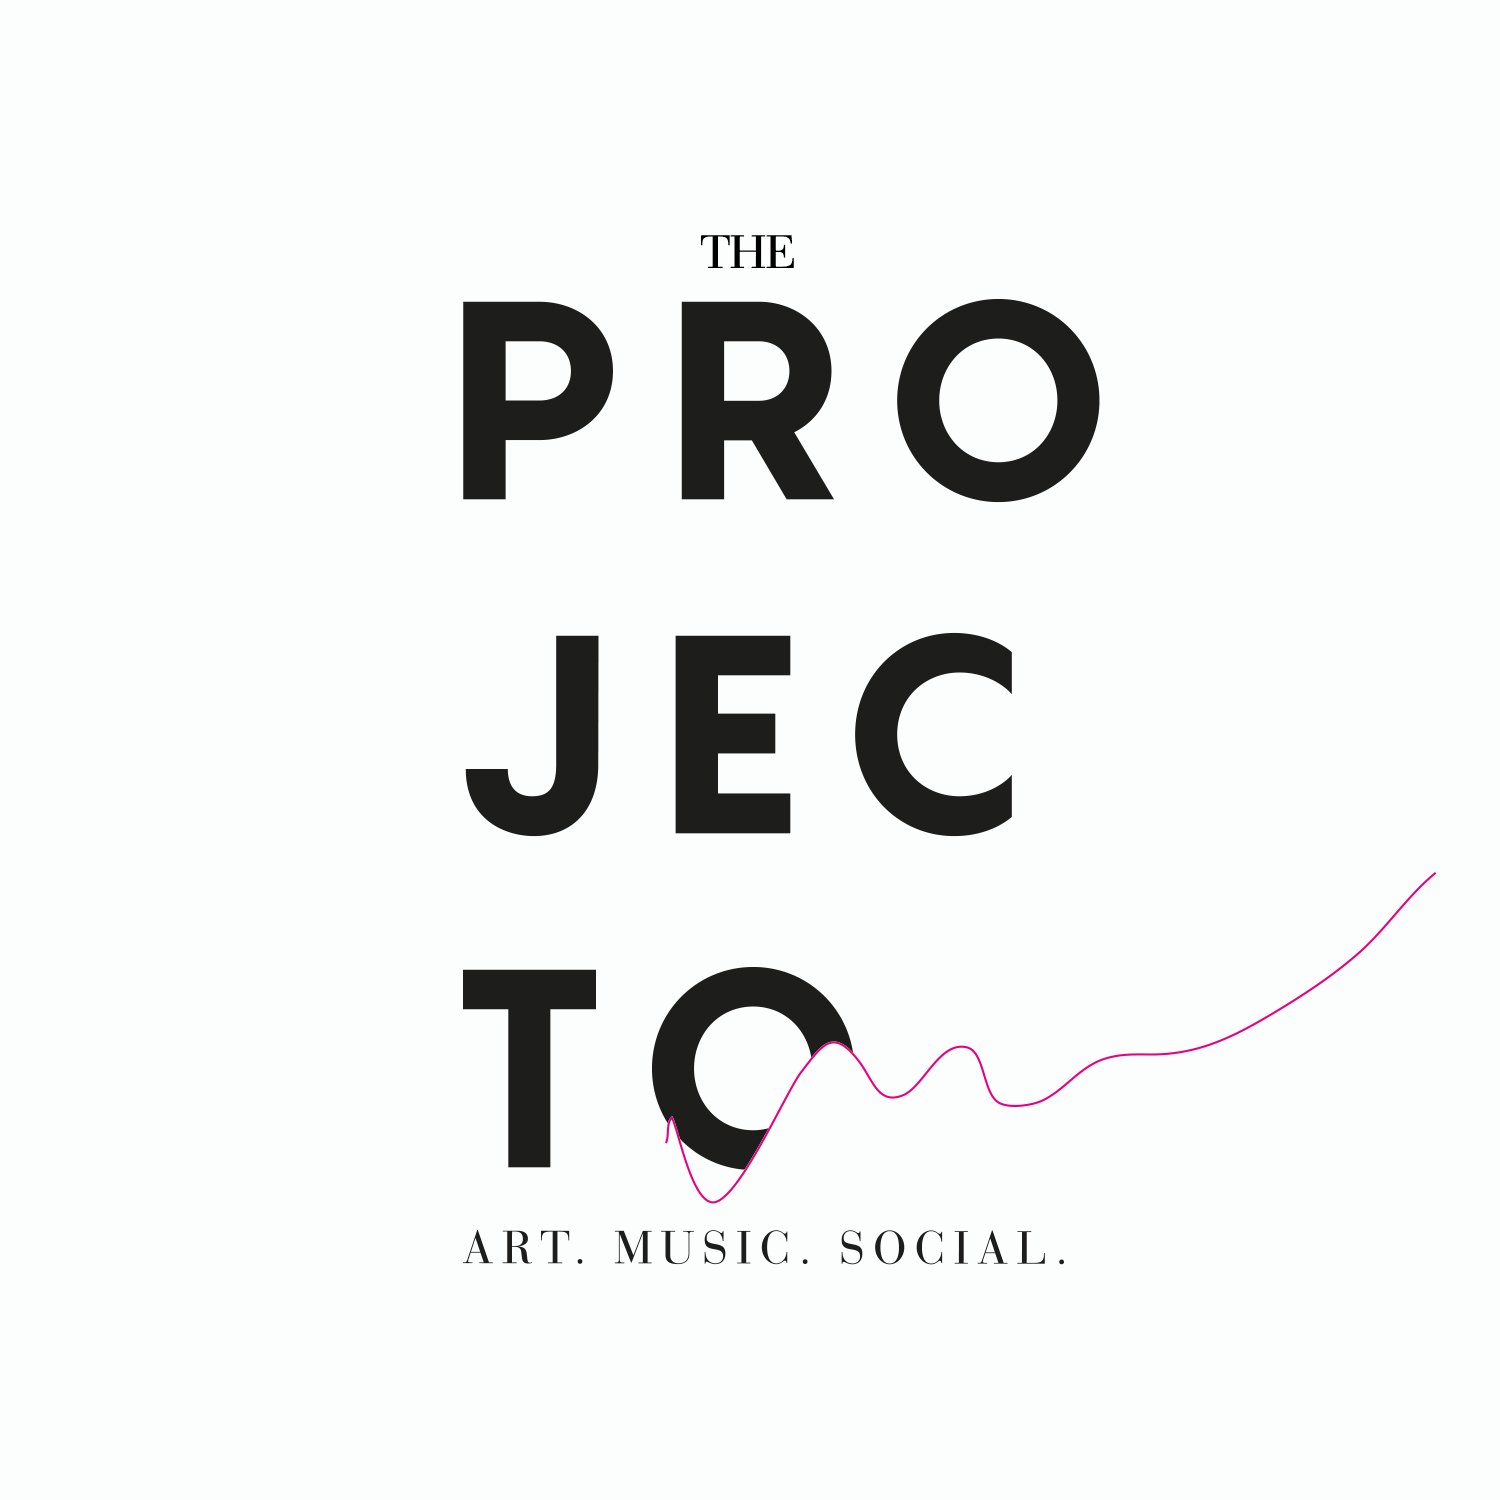 The Projecto